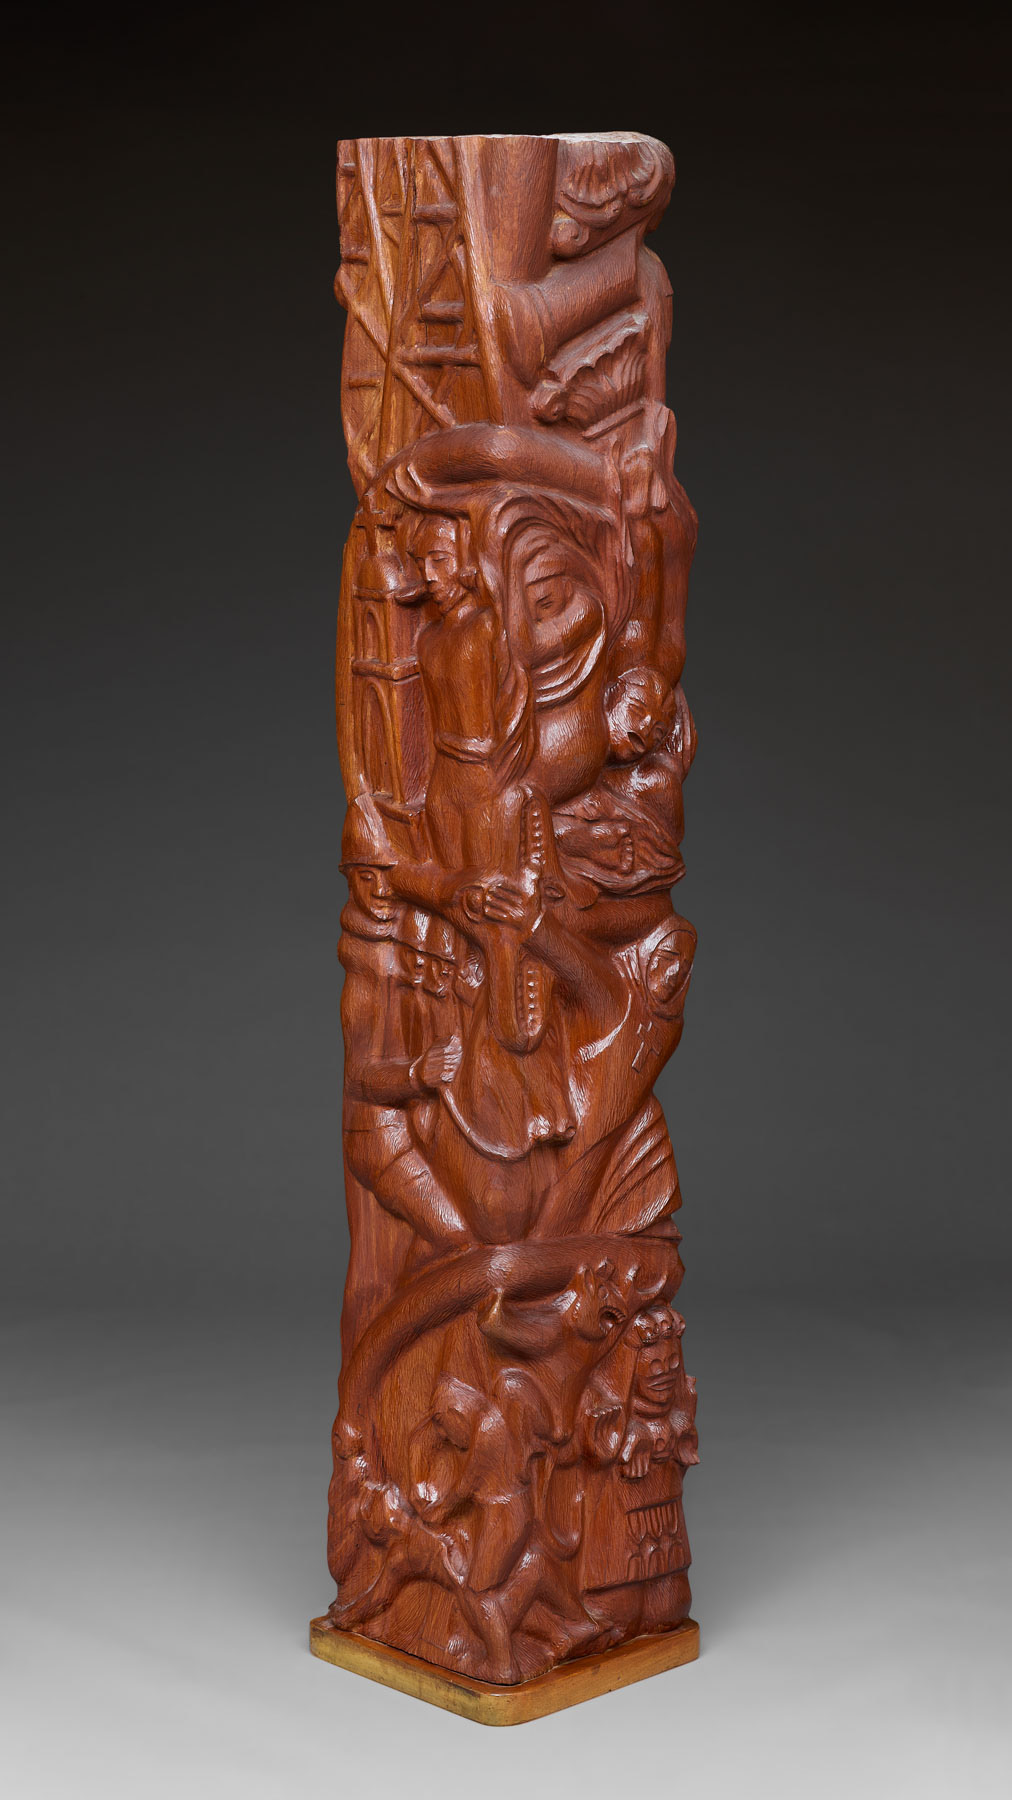 A wood totem-like sculpture featuring human and animal figures.